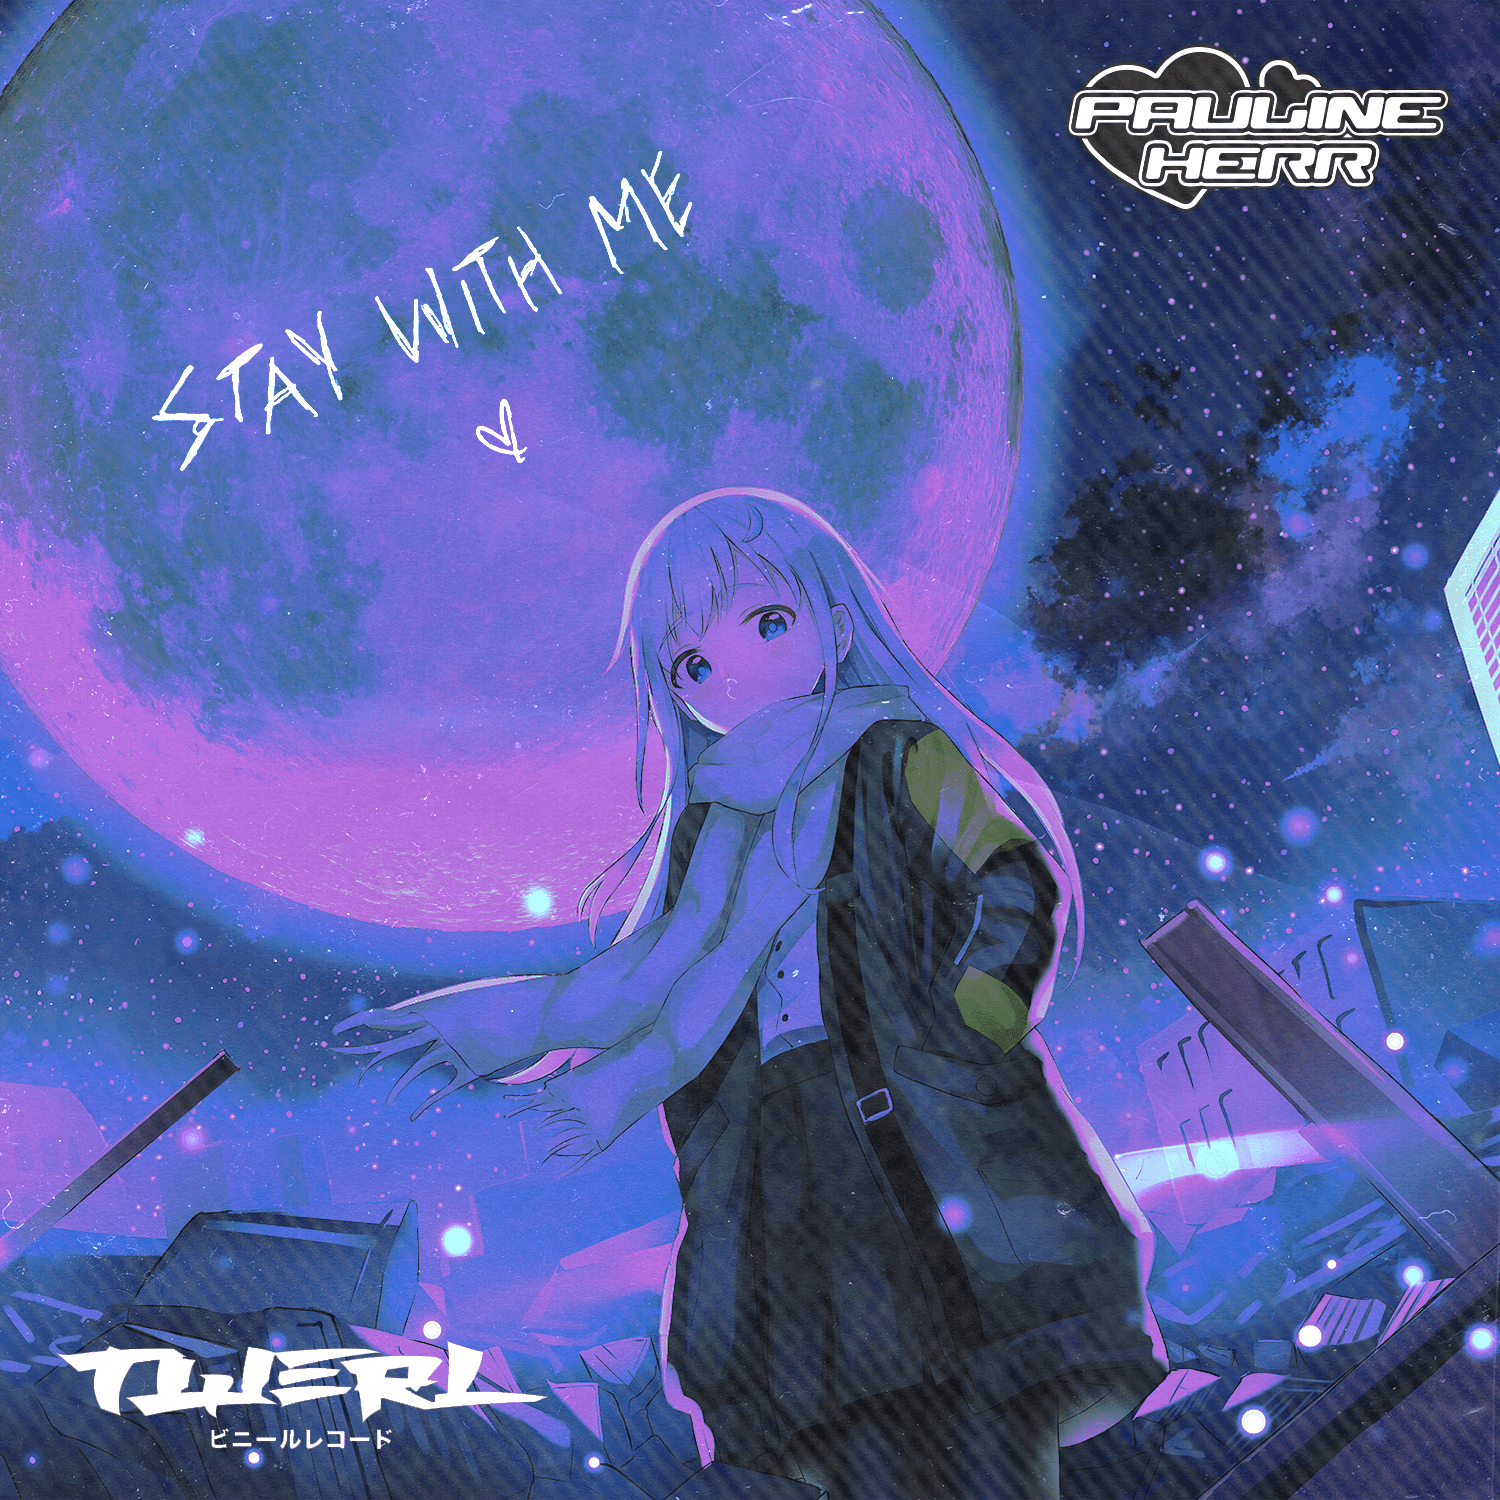 Cover art for Pauline Herr ｡･:*:･ﾟ☆'s song: Pauline Herr & TWERL - Stay With Me